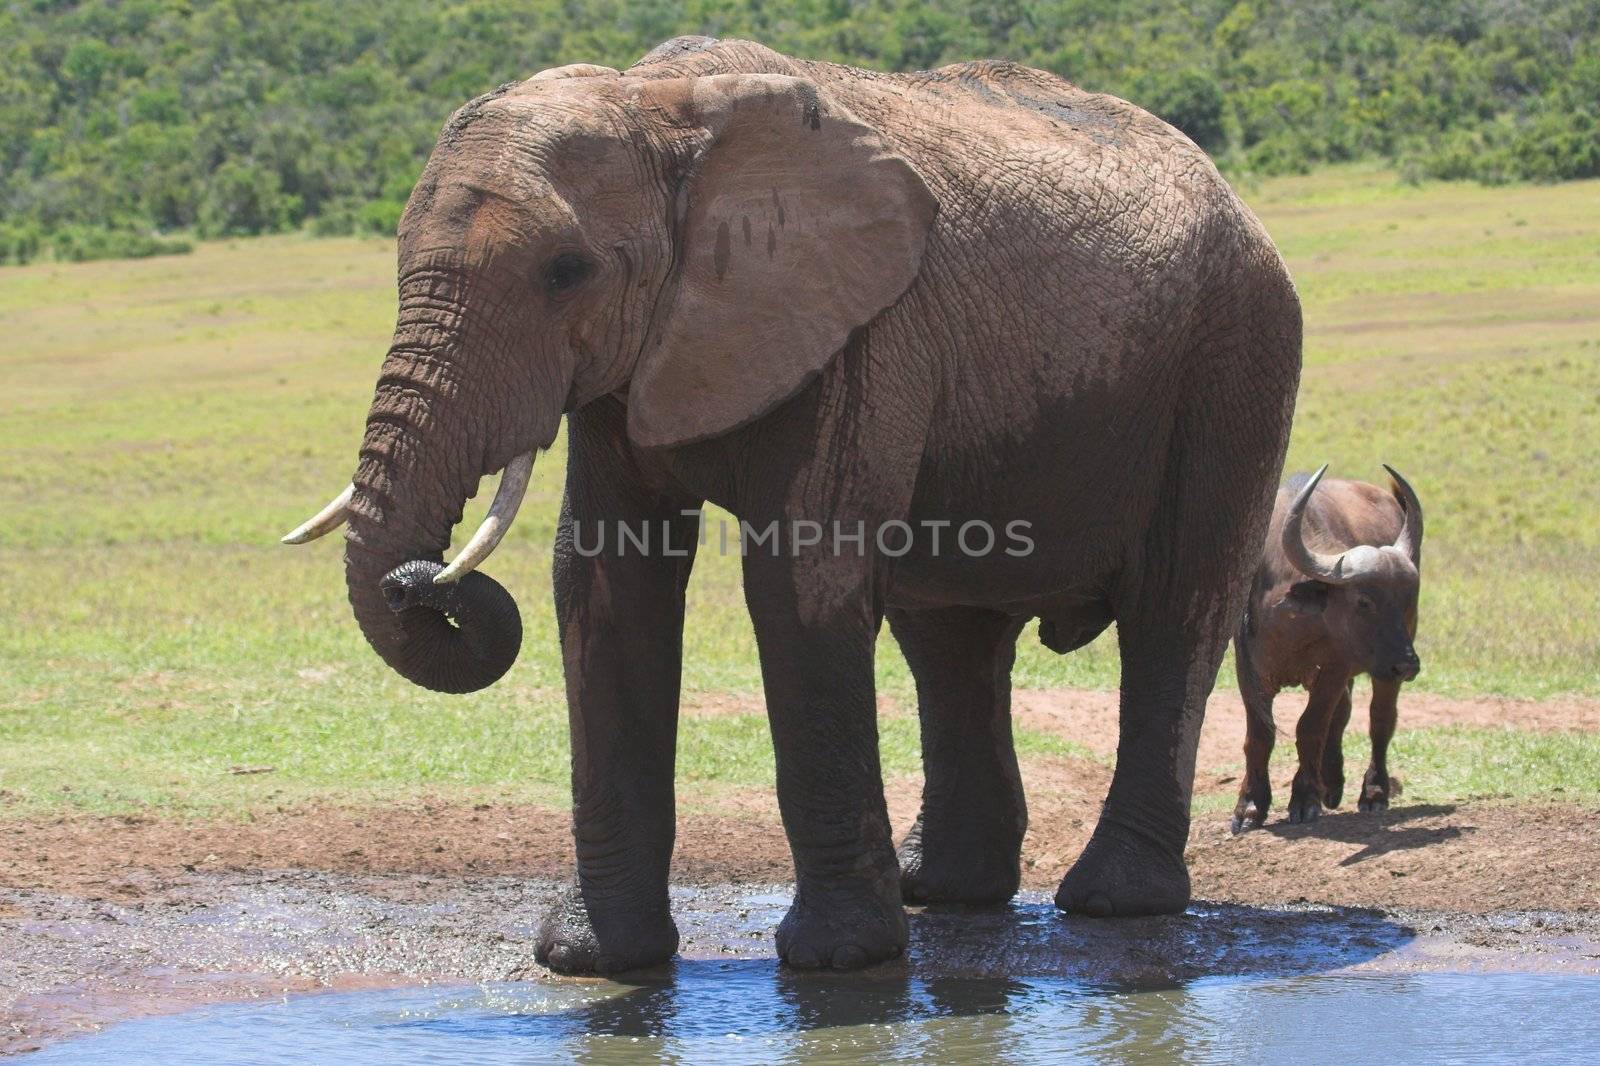 Elephant playing with its trunk